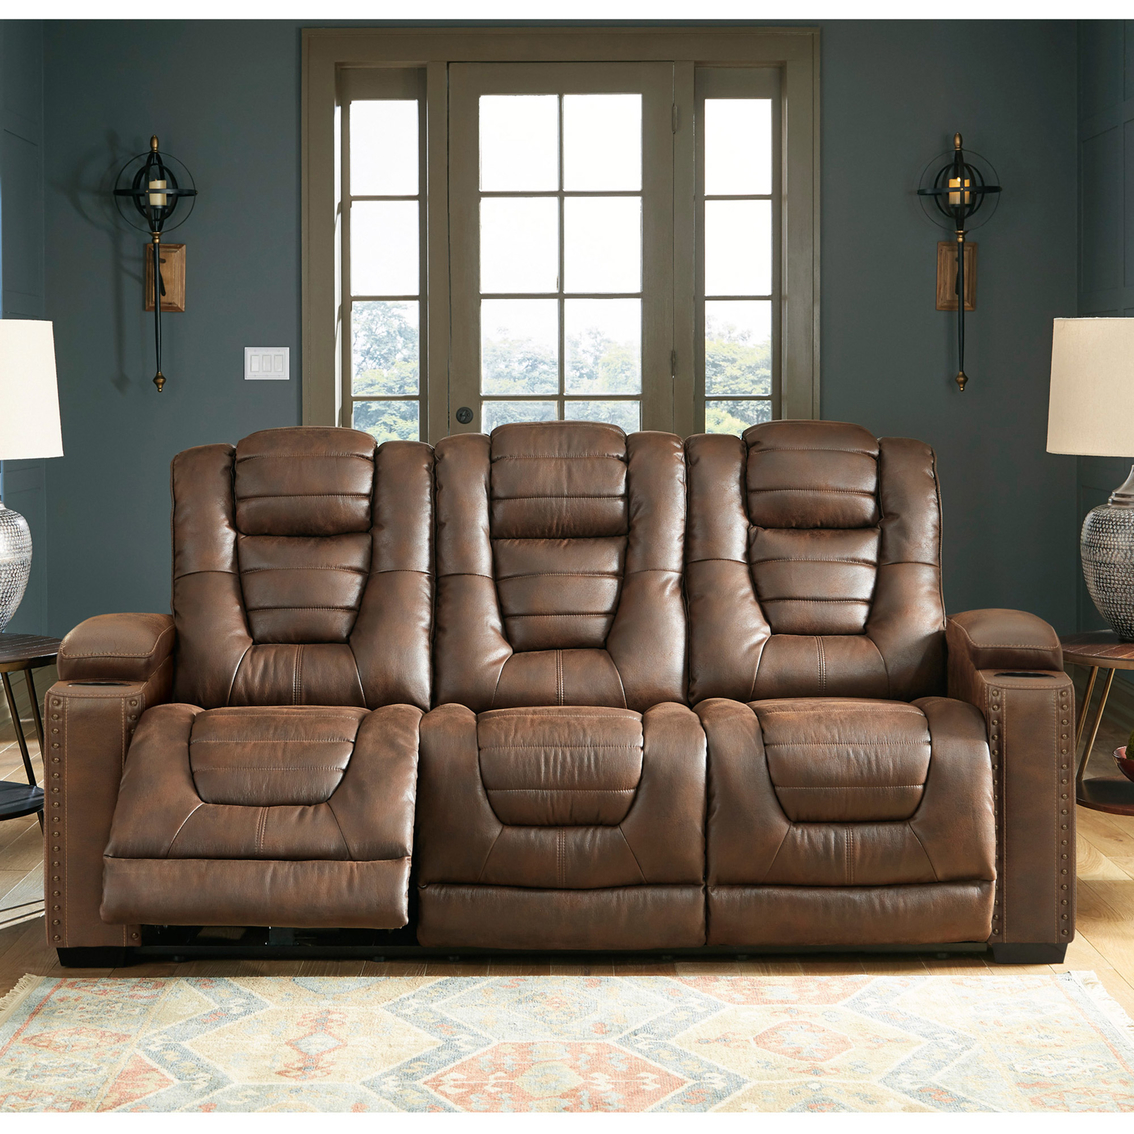 Signature Design by Ashley Owner's Box Power Reclining, Adjustable Headrest Sofa - Image 6 of 7